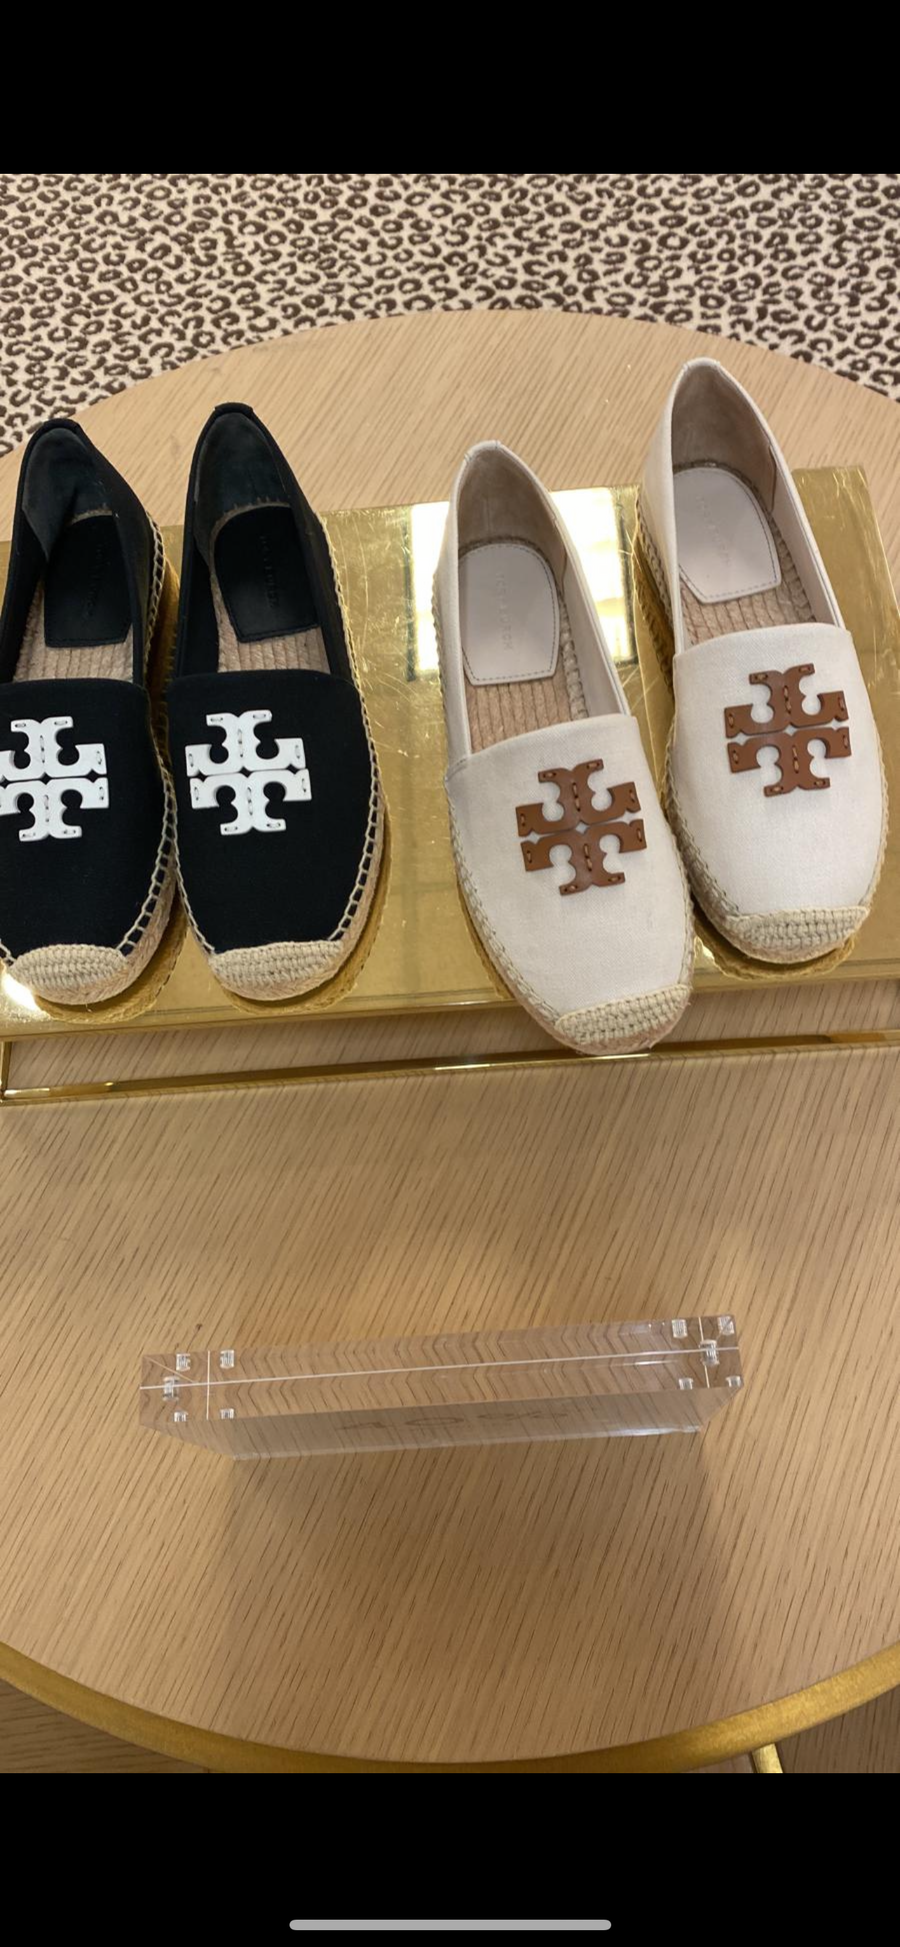 Tory Burch leather espadrilles